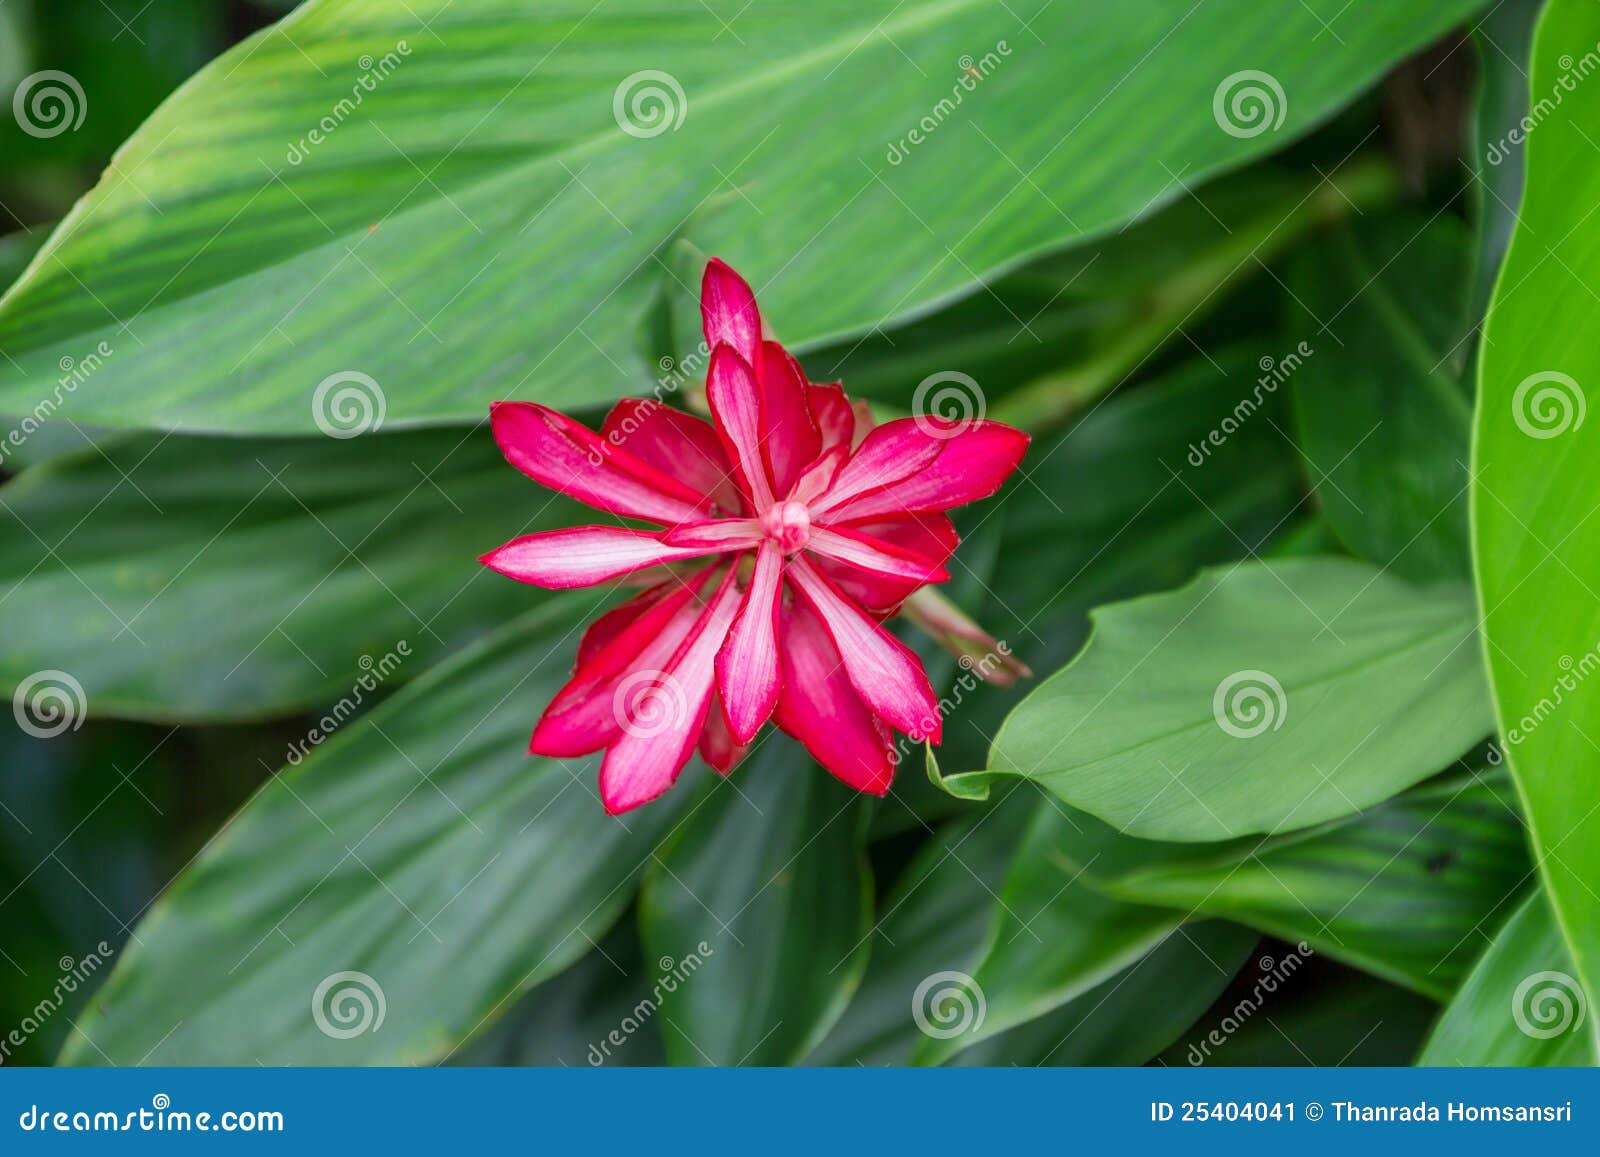 Red flower of galanga on green background